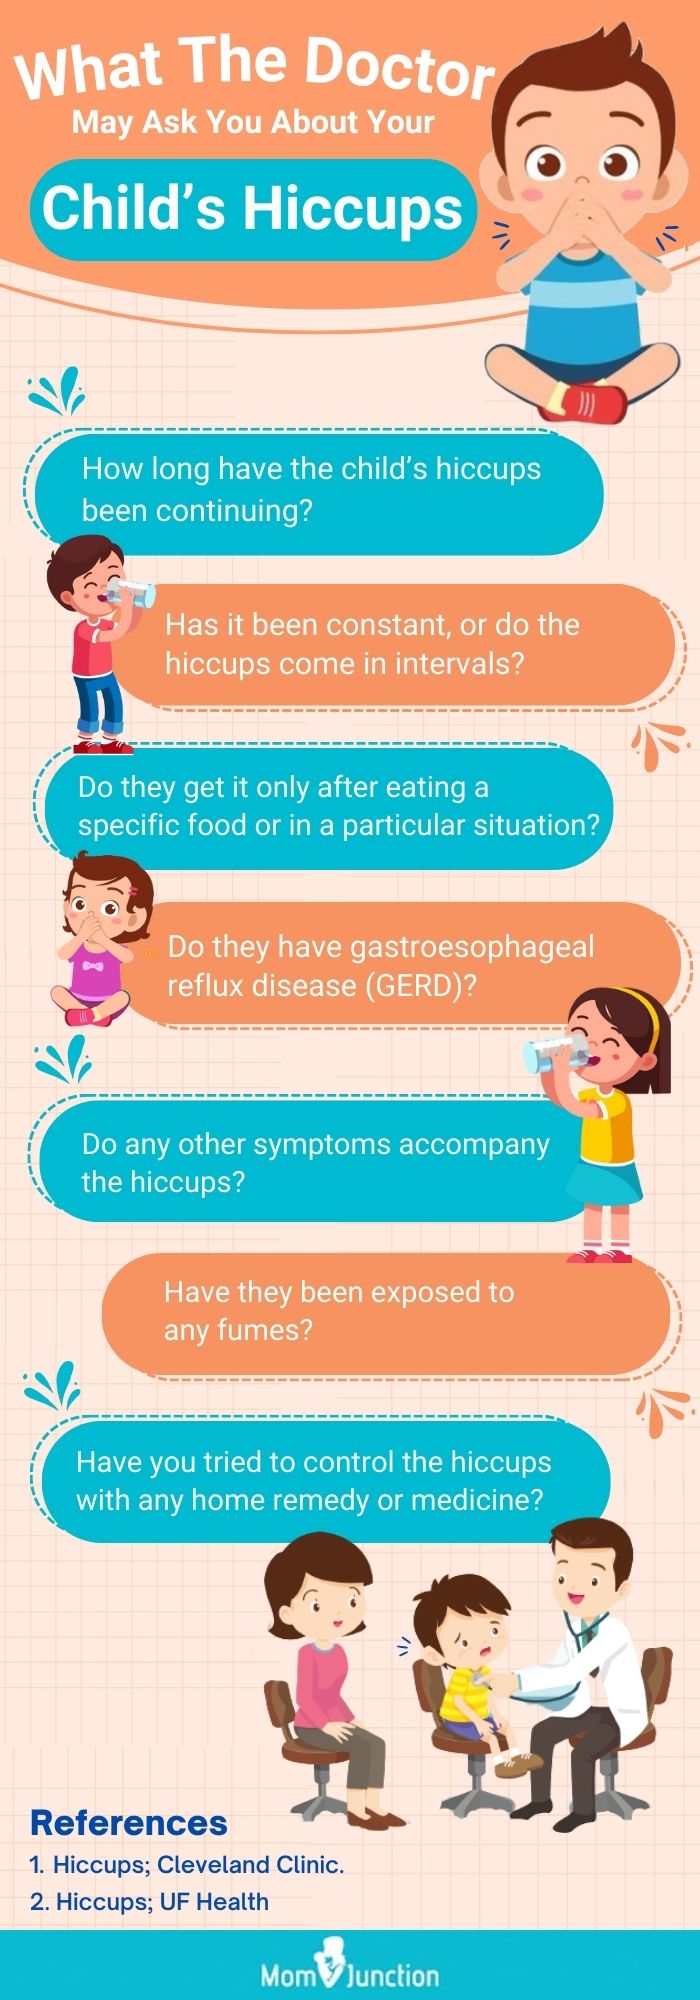 hiccups in children [infographic]